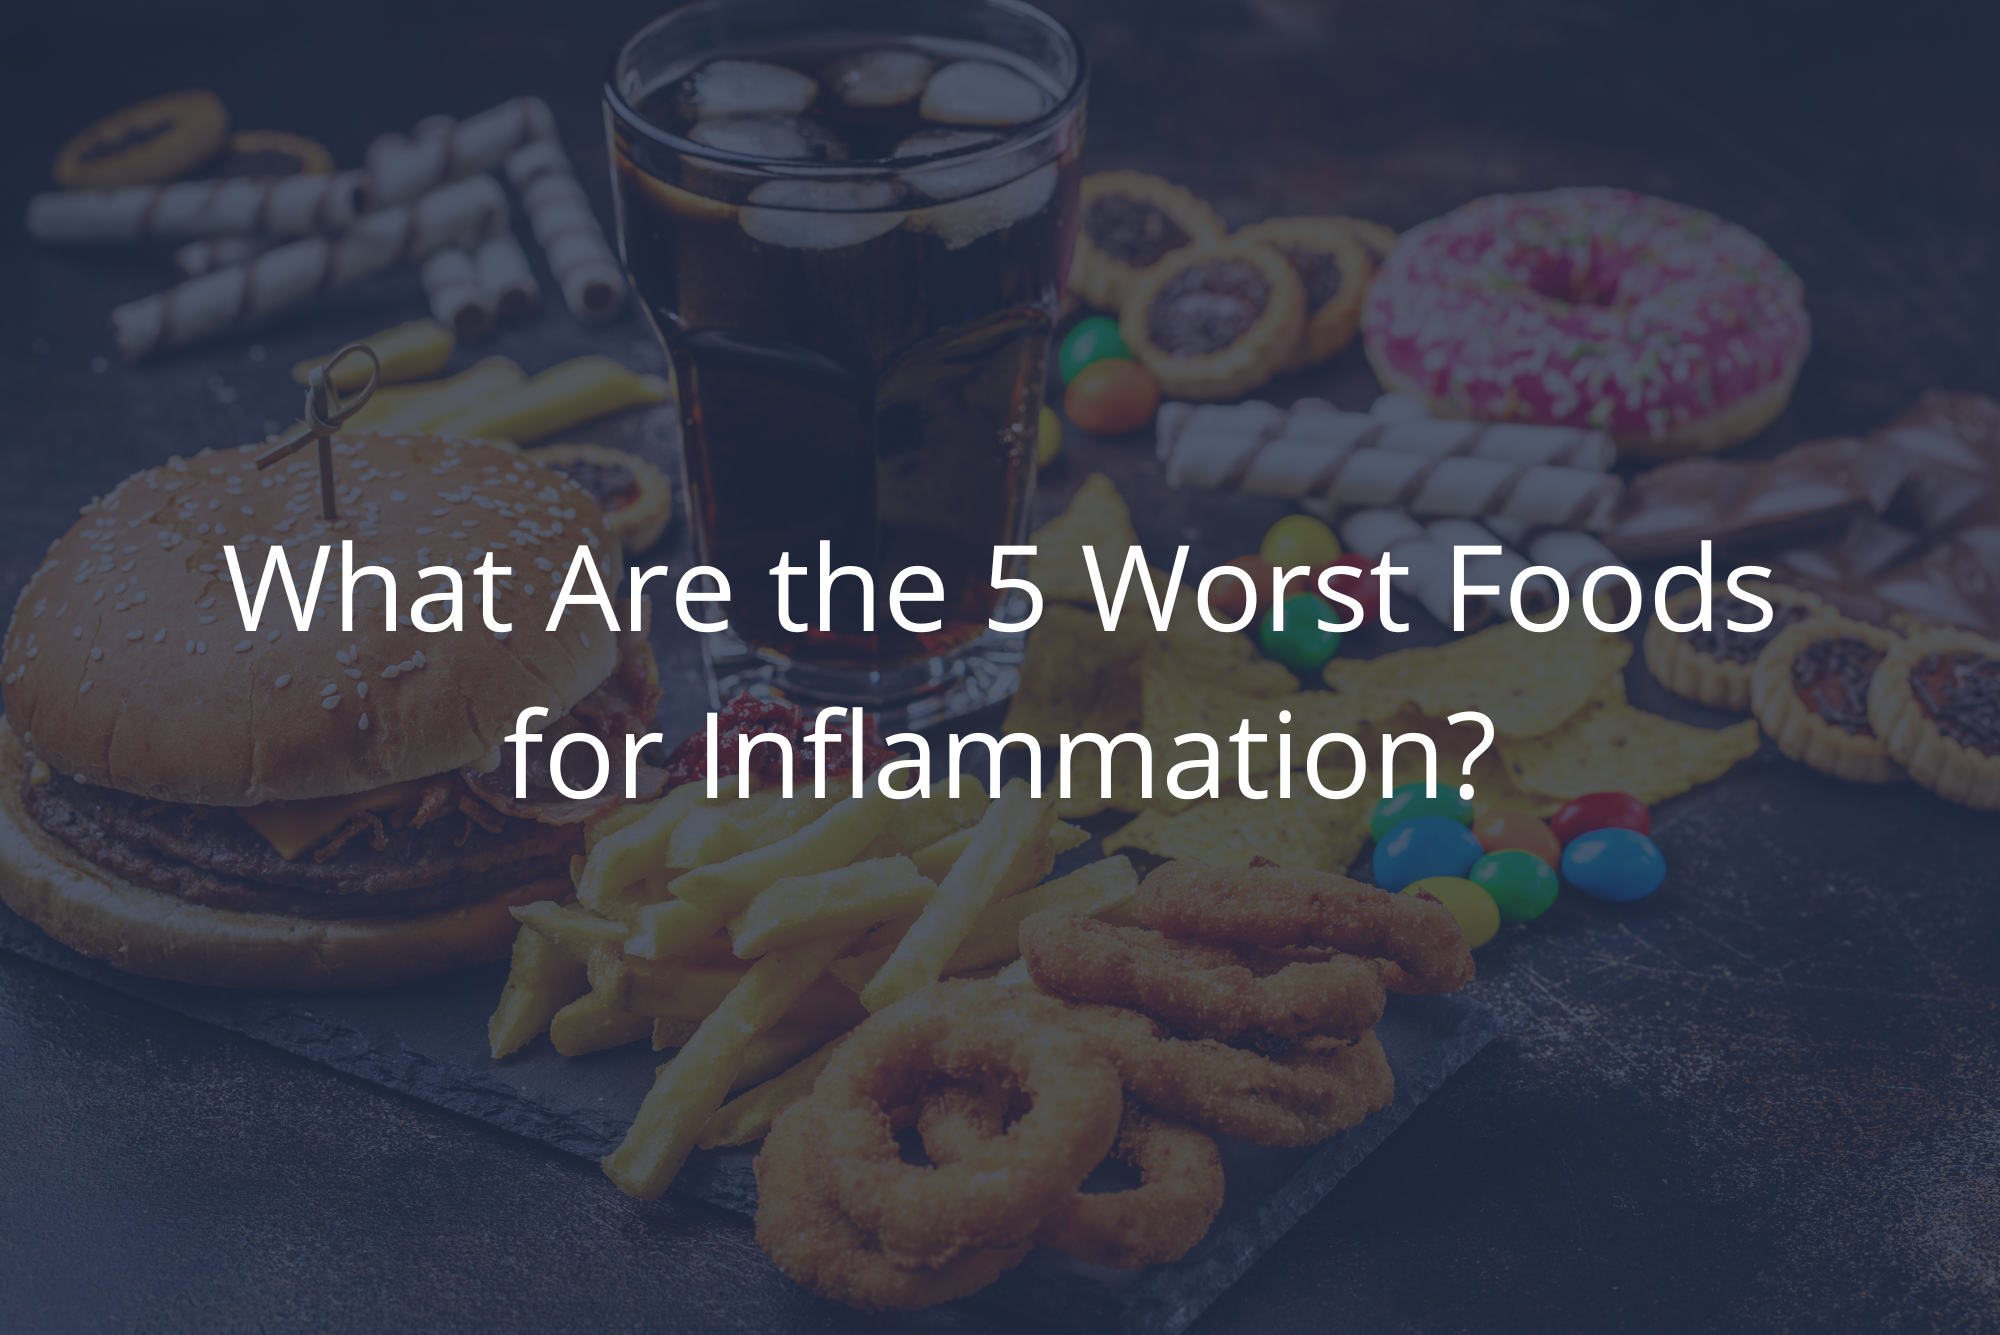 A large spread of some of the 10 worst foods for inflammation.